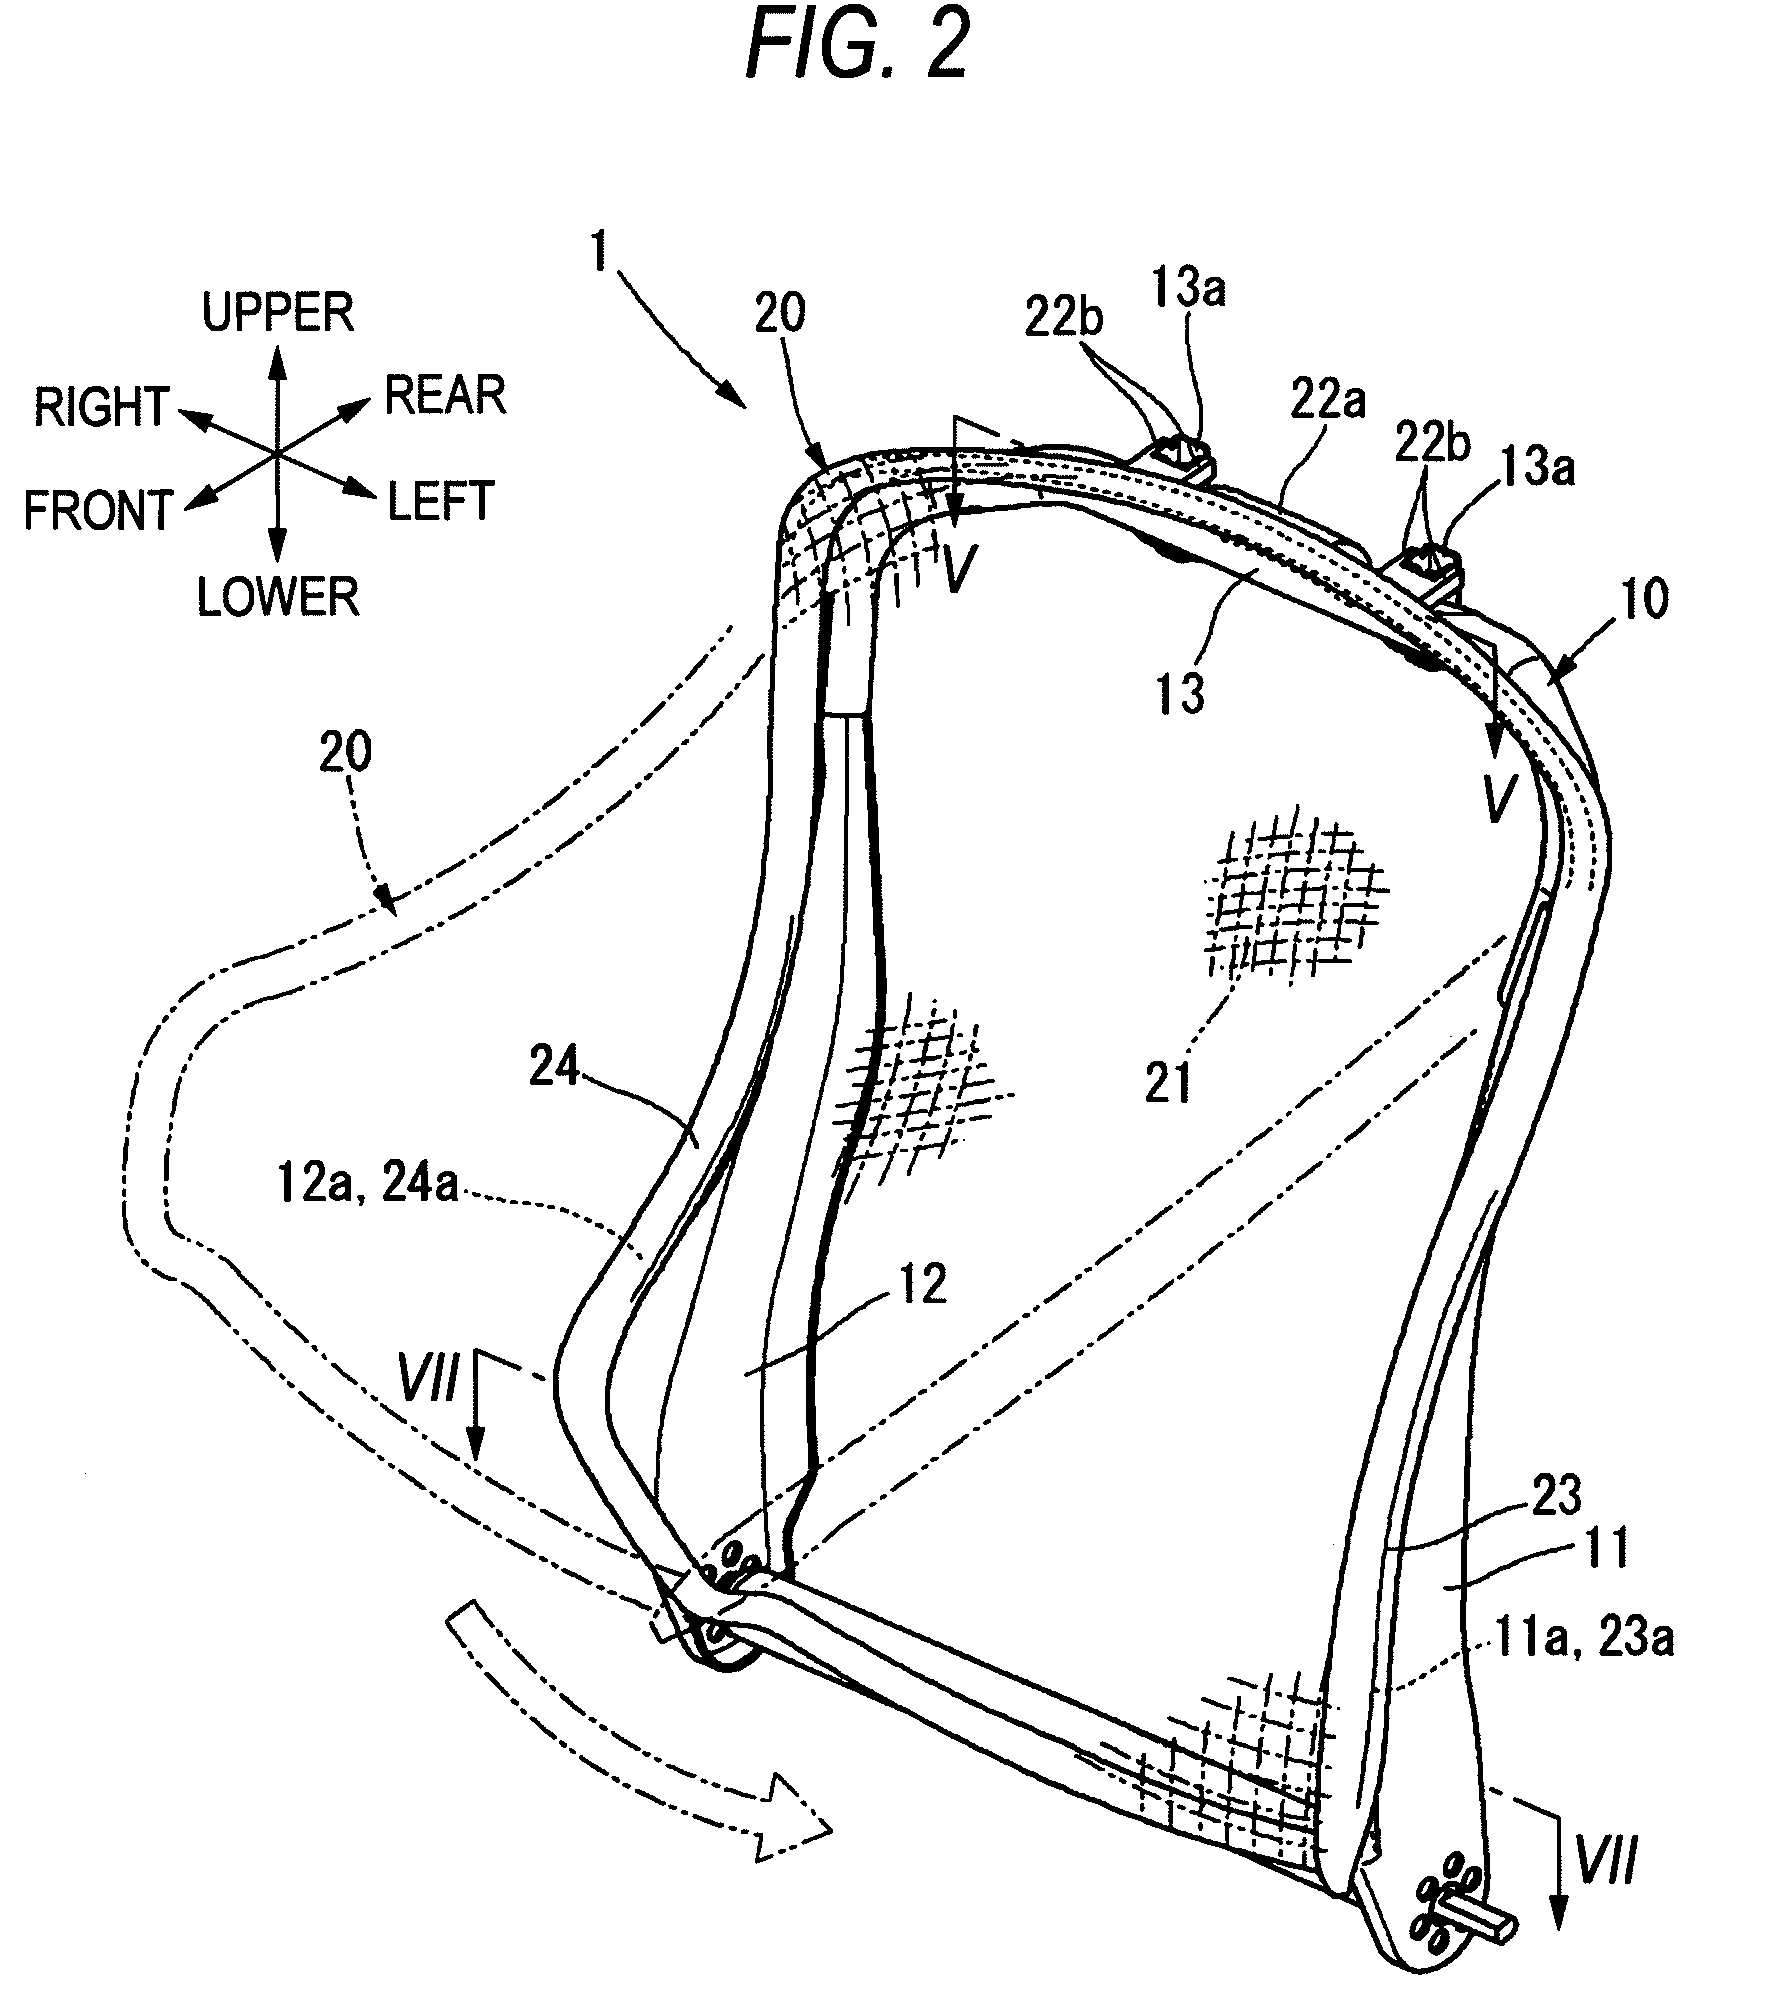 Assembling structure of planar elastic body of vehicle seat